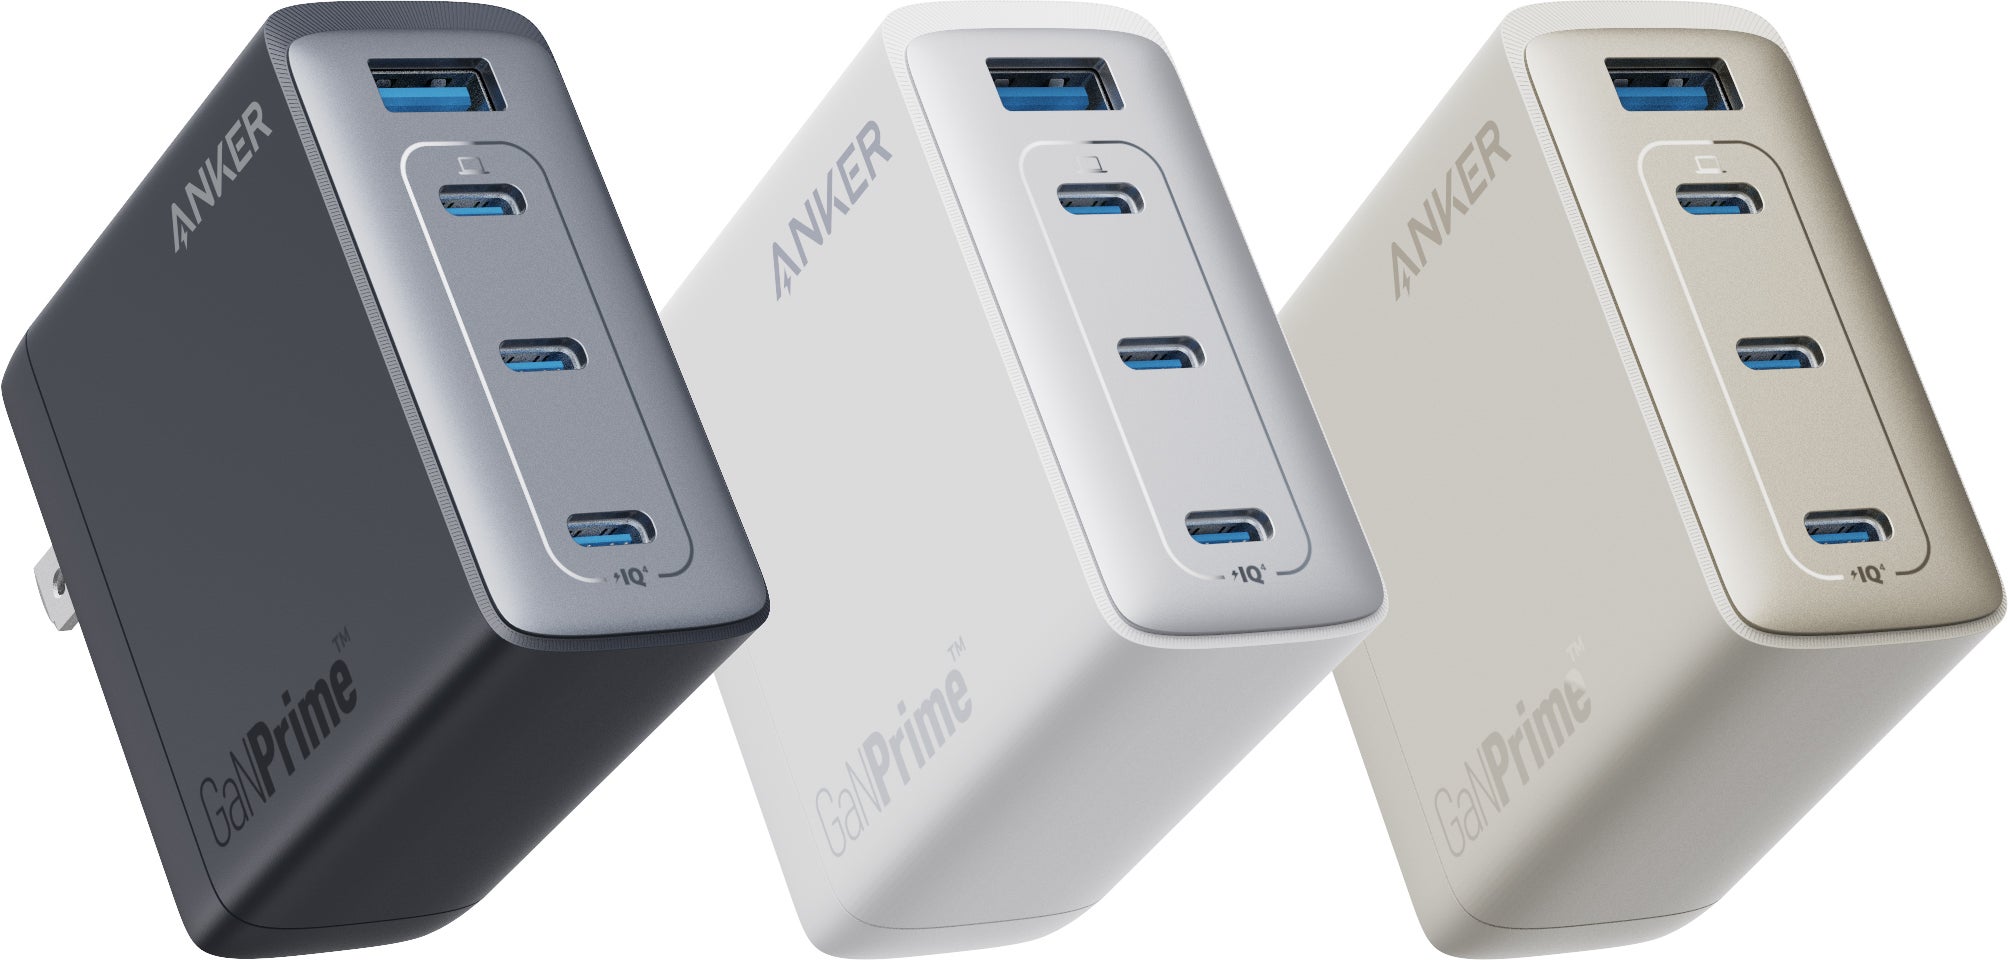 Anker’s New GaN Chargers Can Now Deliver Up to 150W of Power Across Multiple Devices